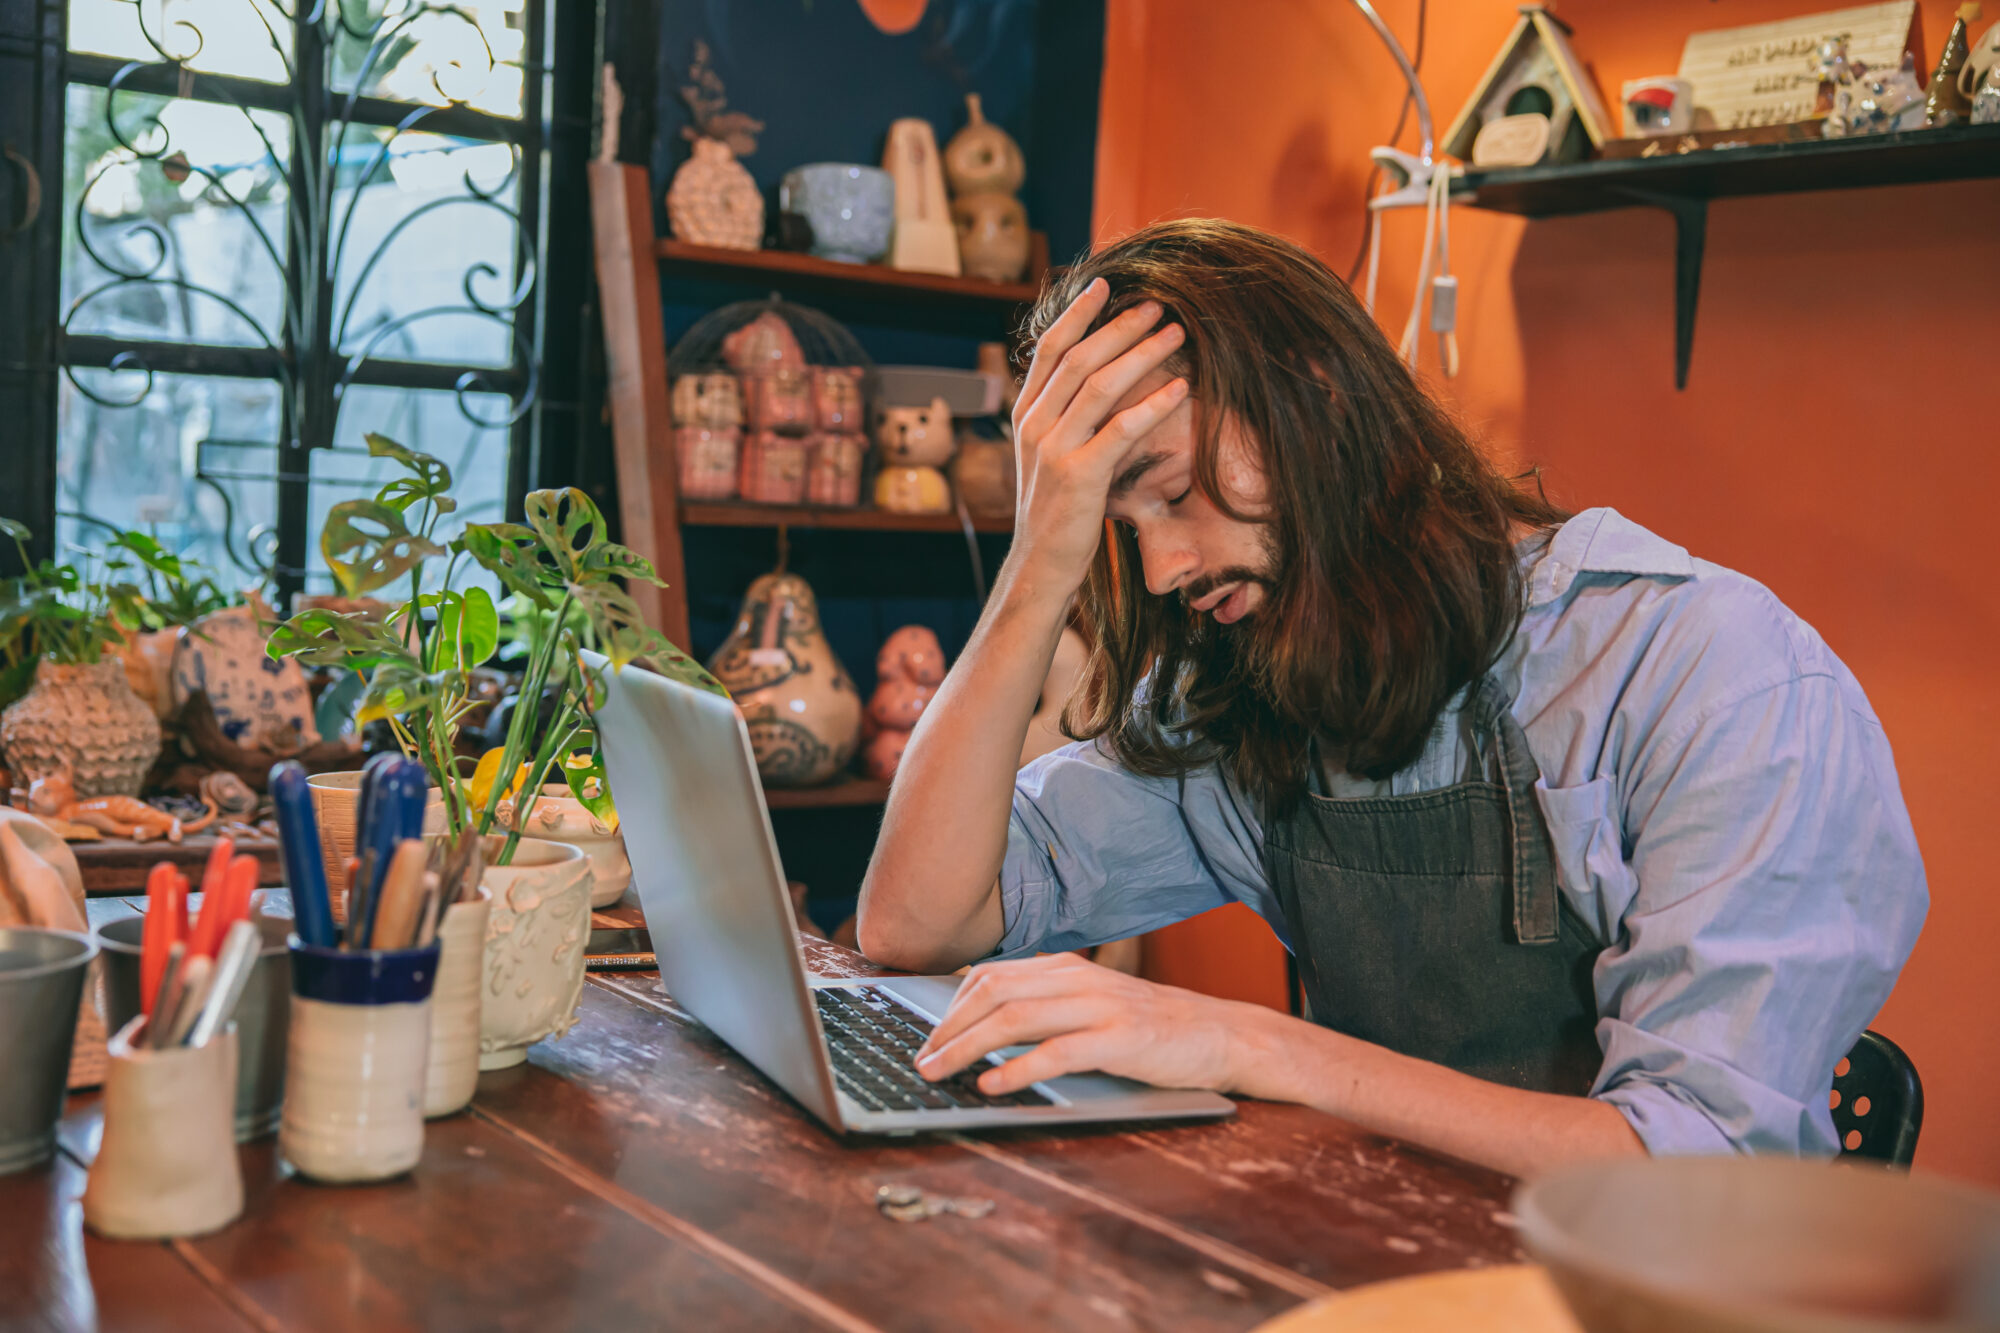 Common Financial Mistakes Small Businesses Make: Tips to Avoid Them